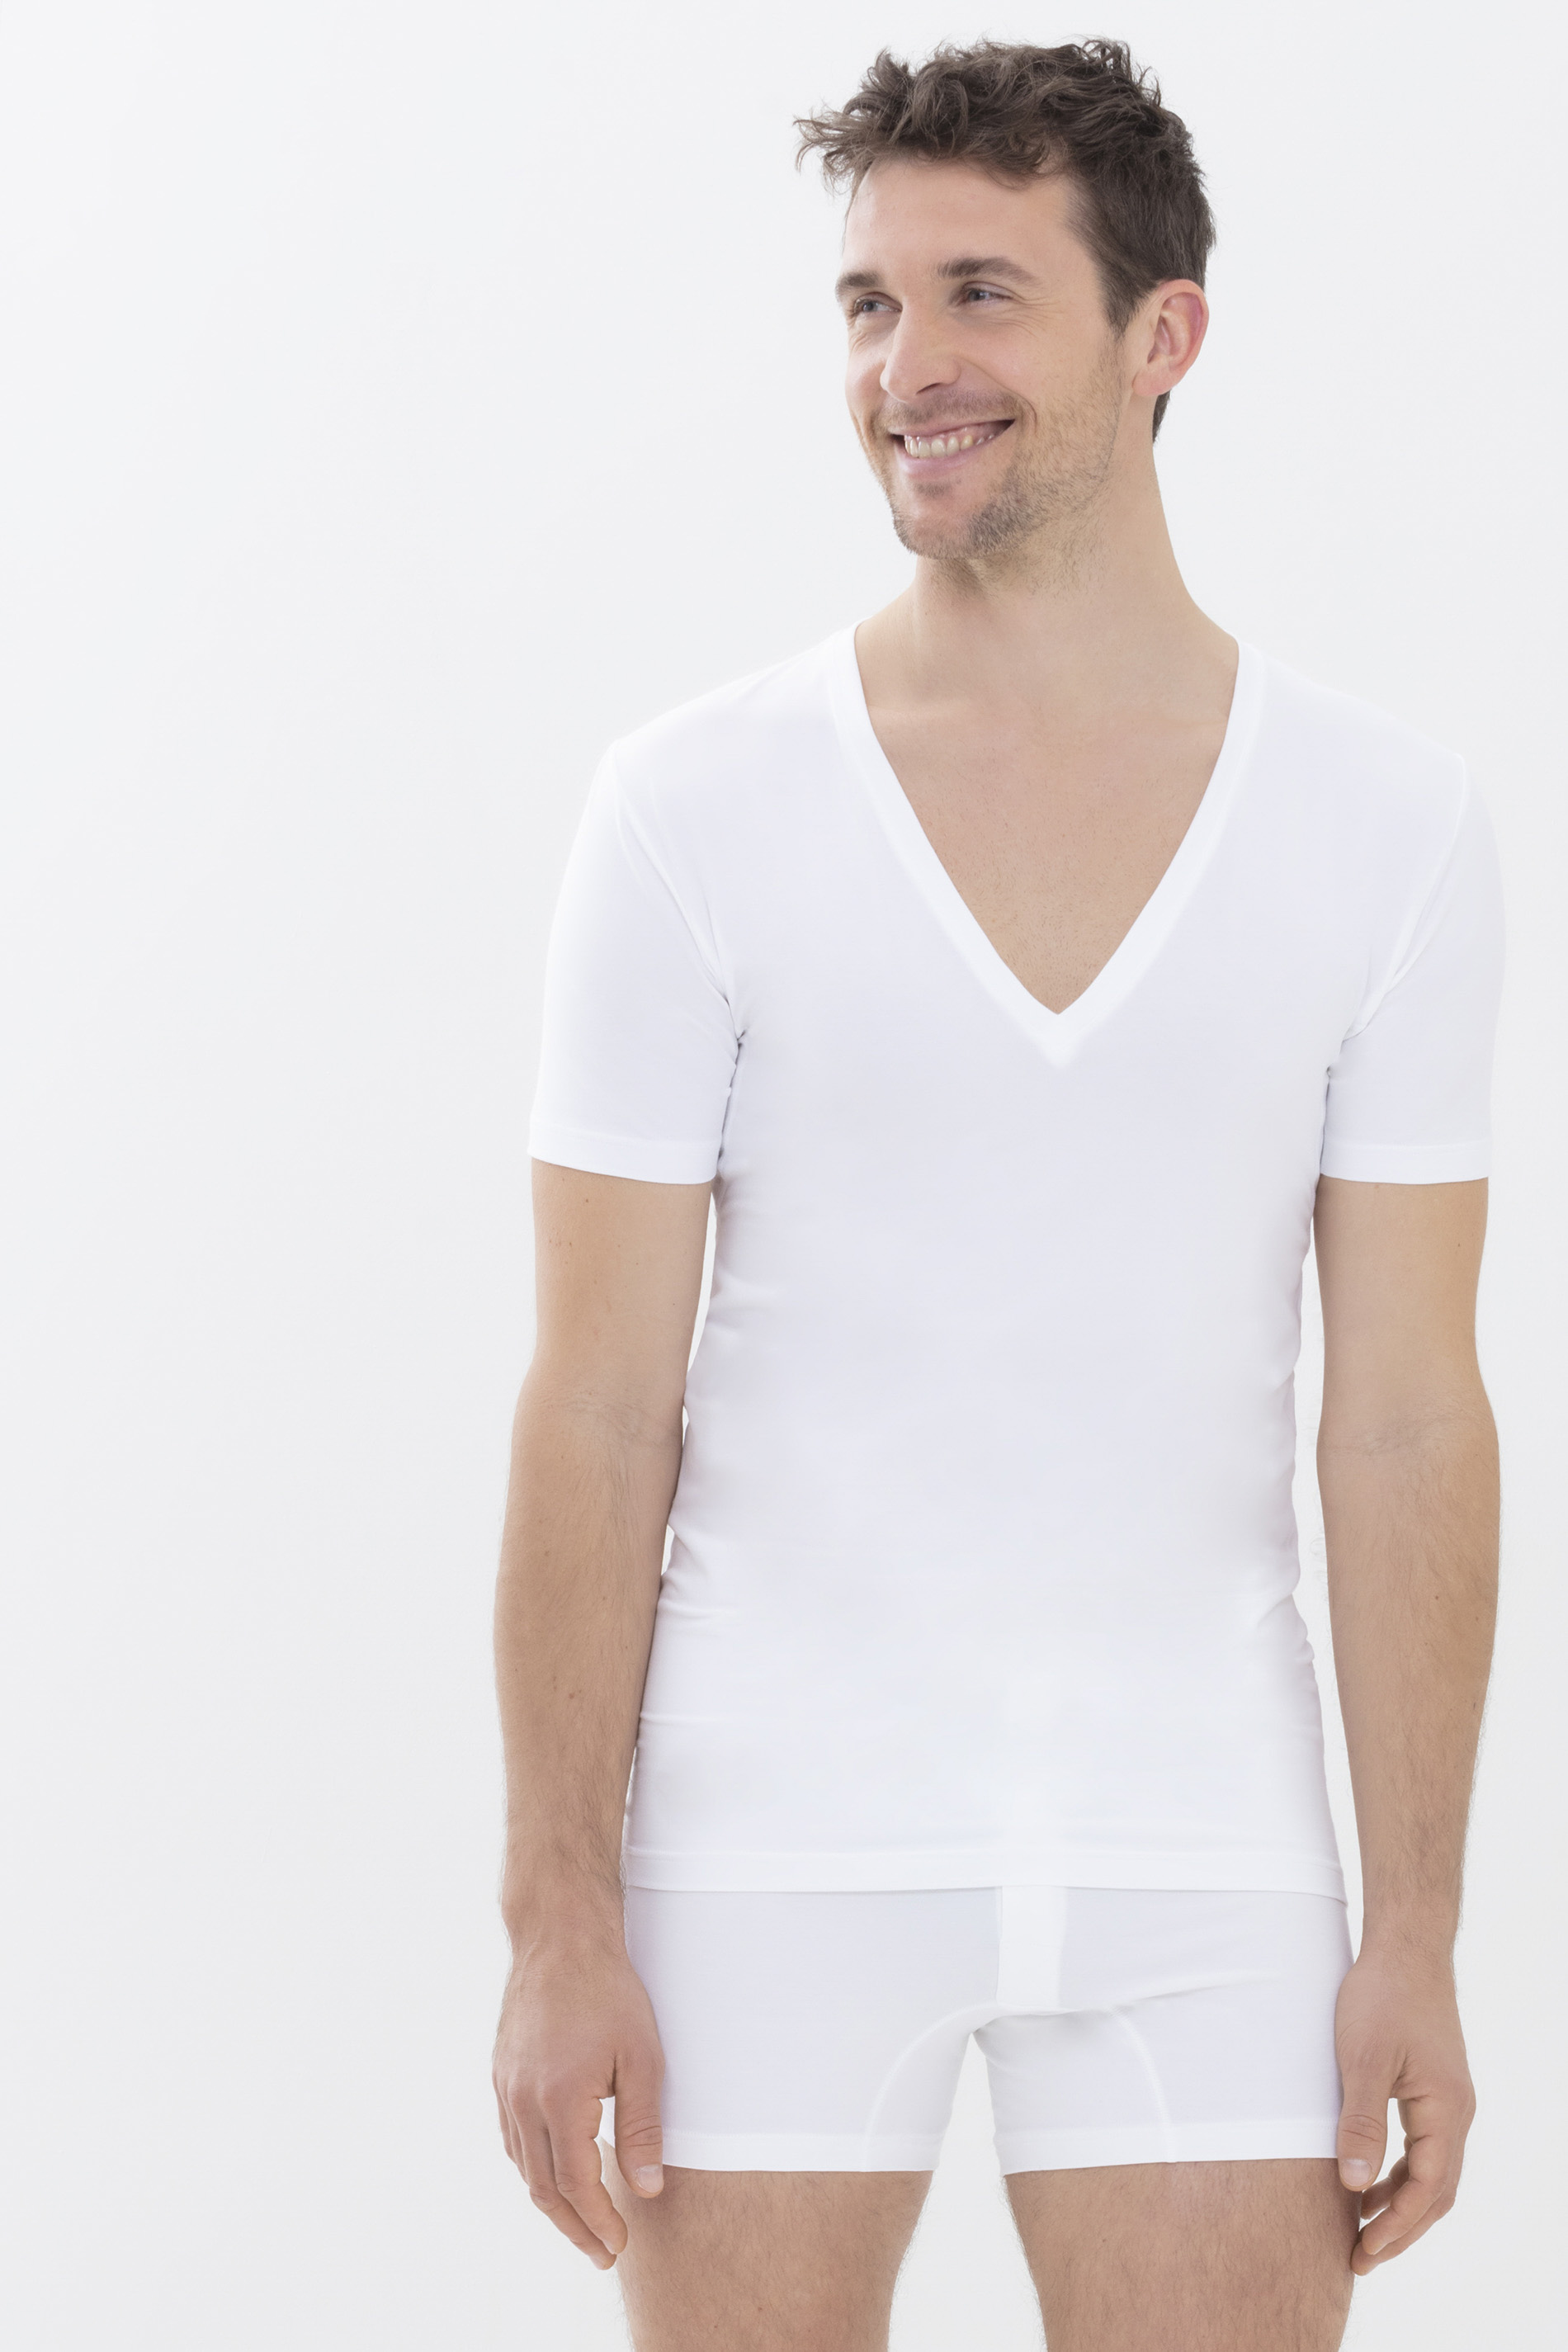 V-Neck White Business Class Front View | mey®